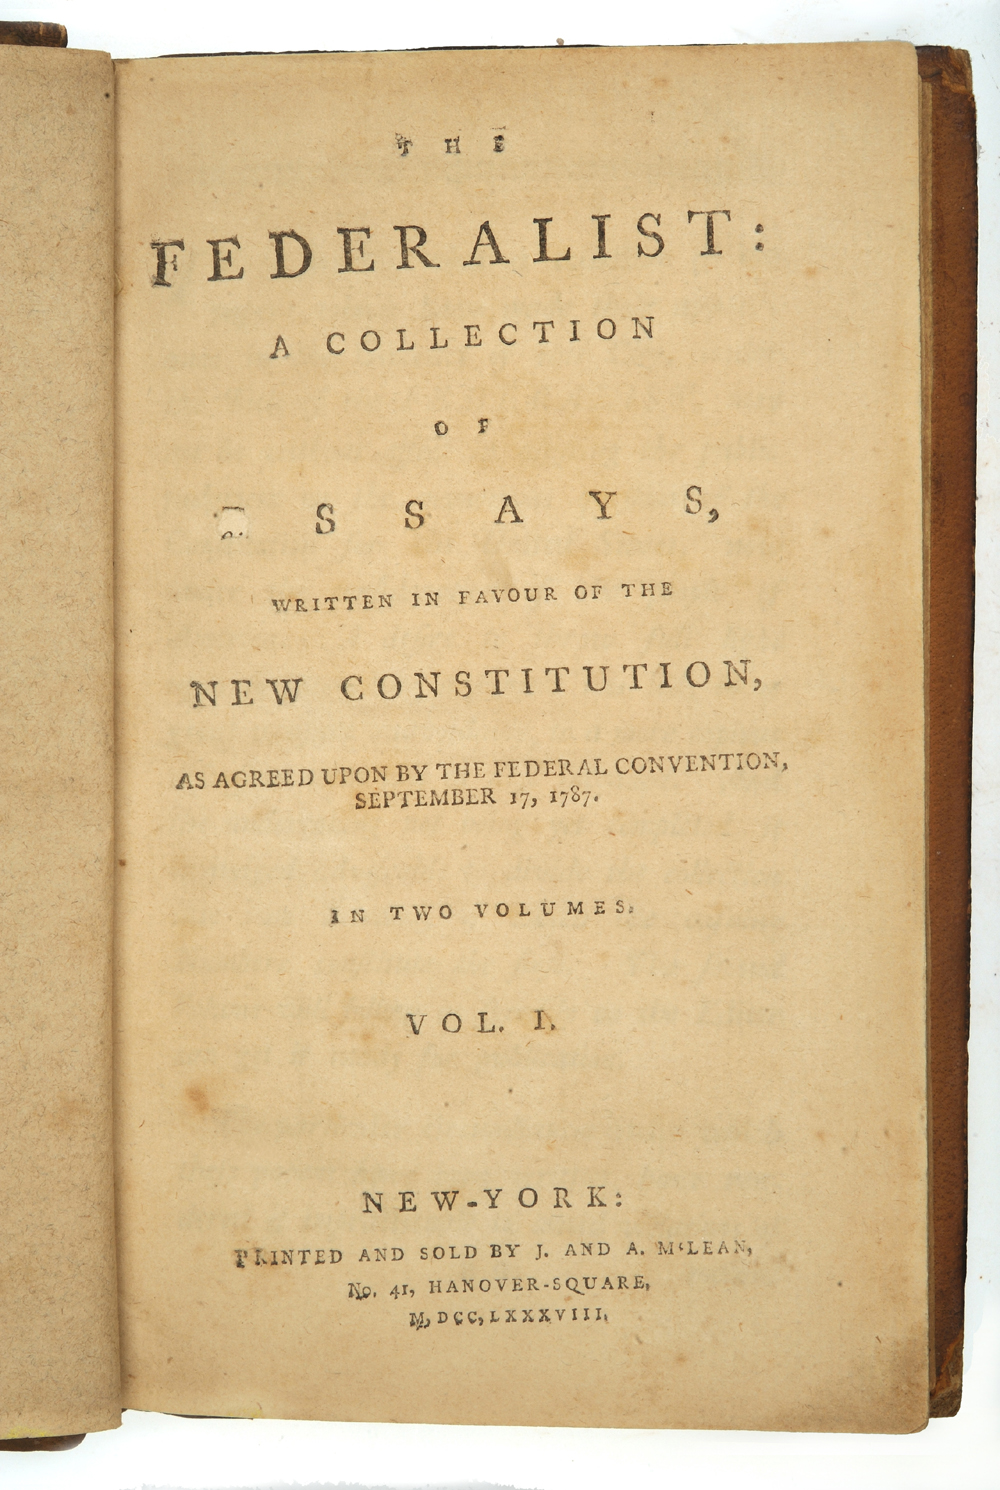 The Federalist: A Collection of Essays, Written in Favour of the New Constitution, 1788